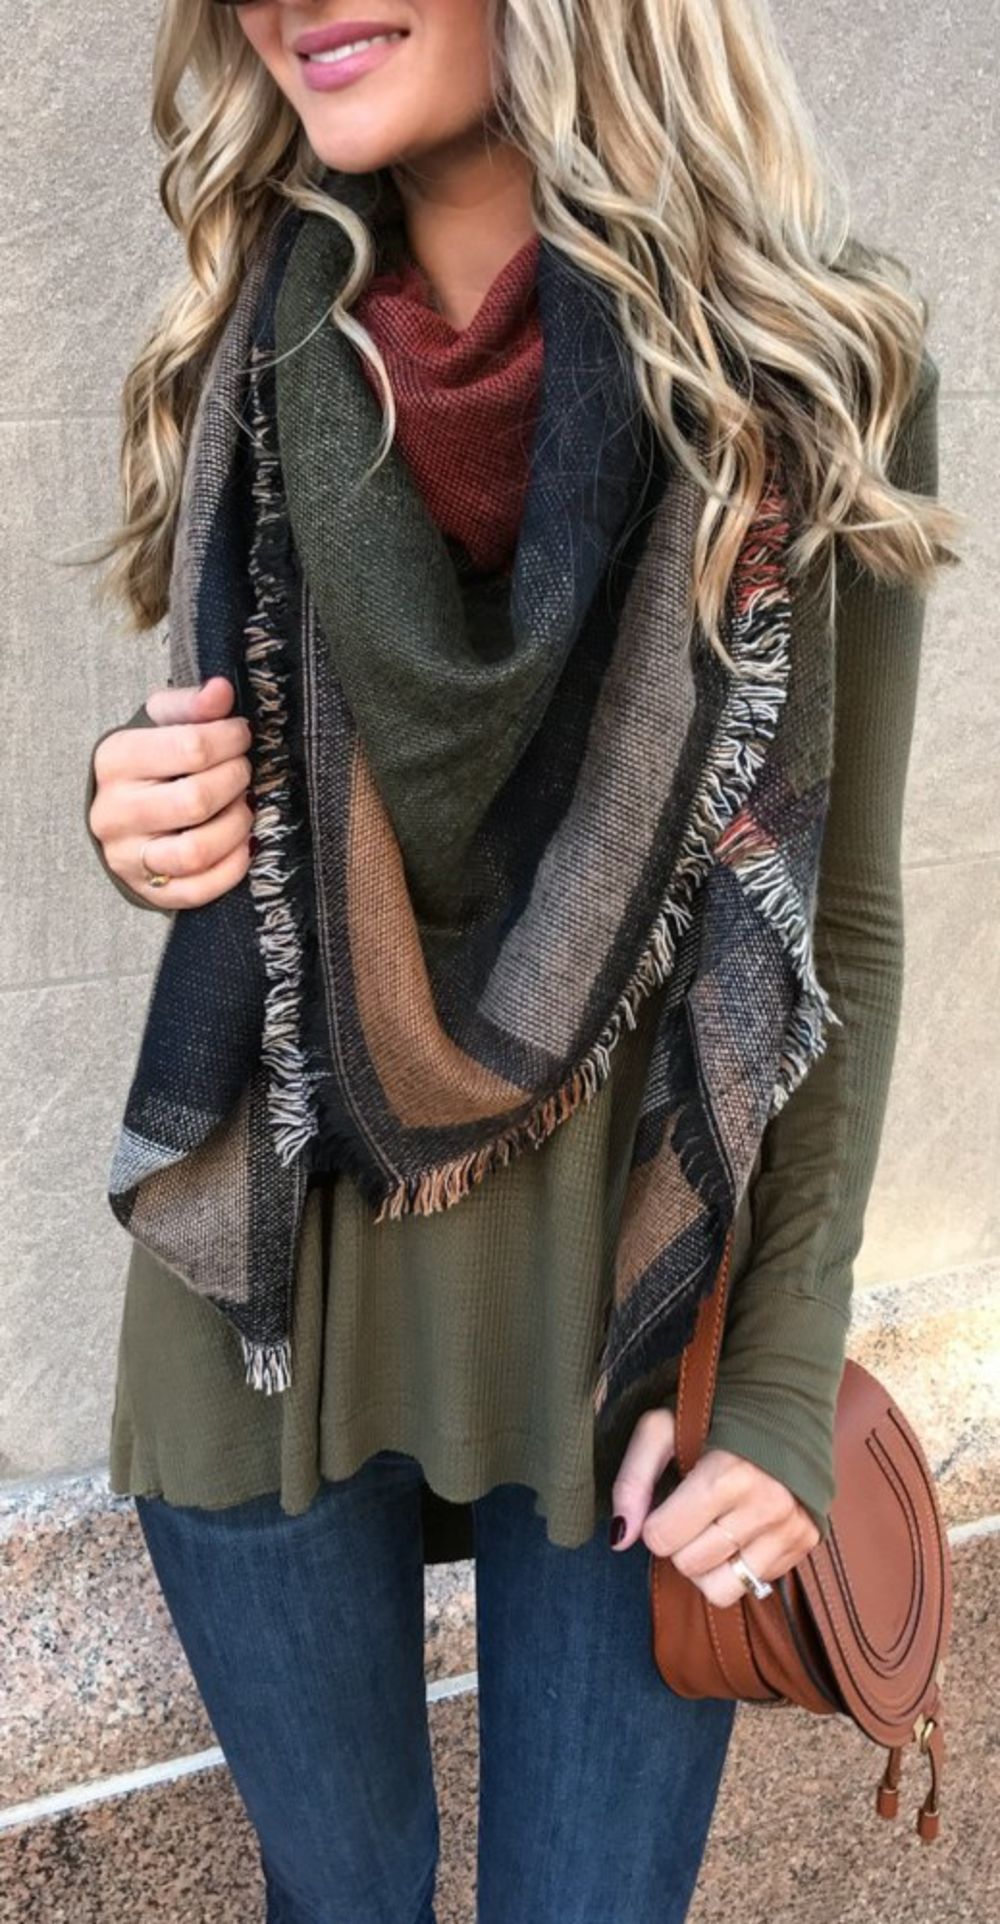 Stunning 46 Stunning Fall Outfits With Cardigan from https://www.fashionetter.com/2017/06/09/46-stunning-fall-outfits-cardigan/